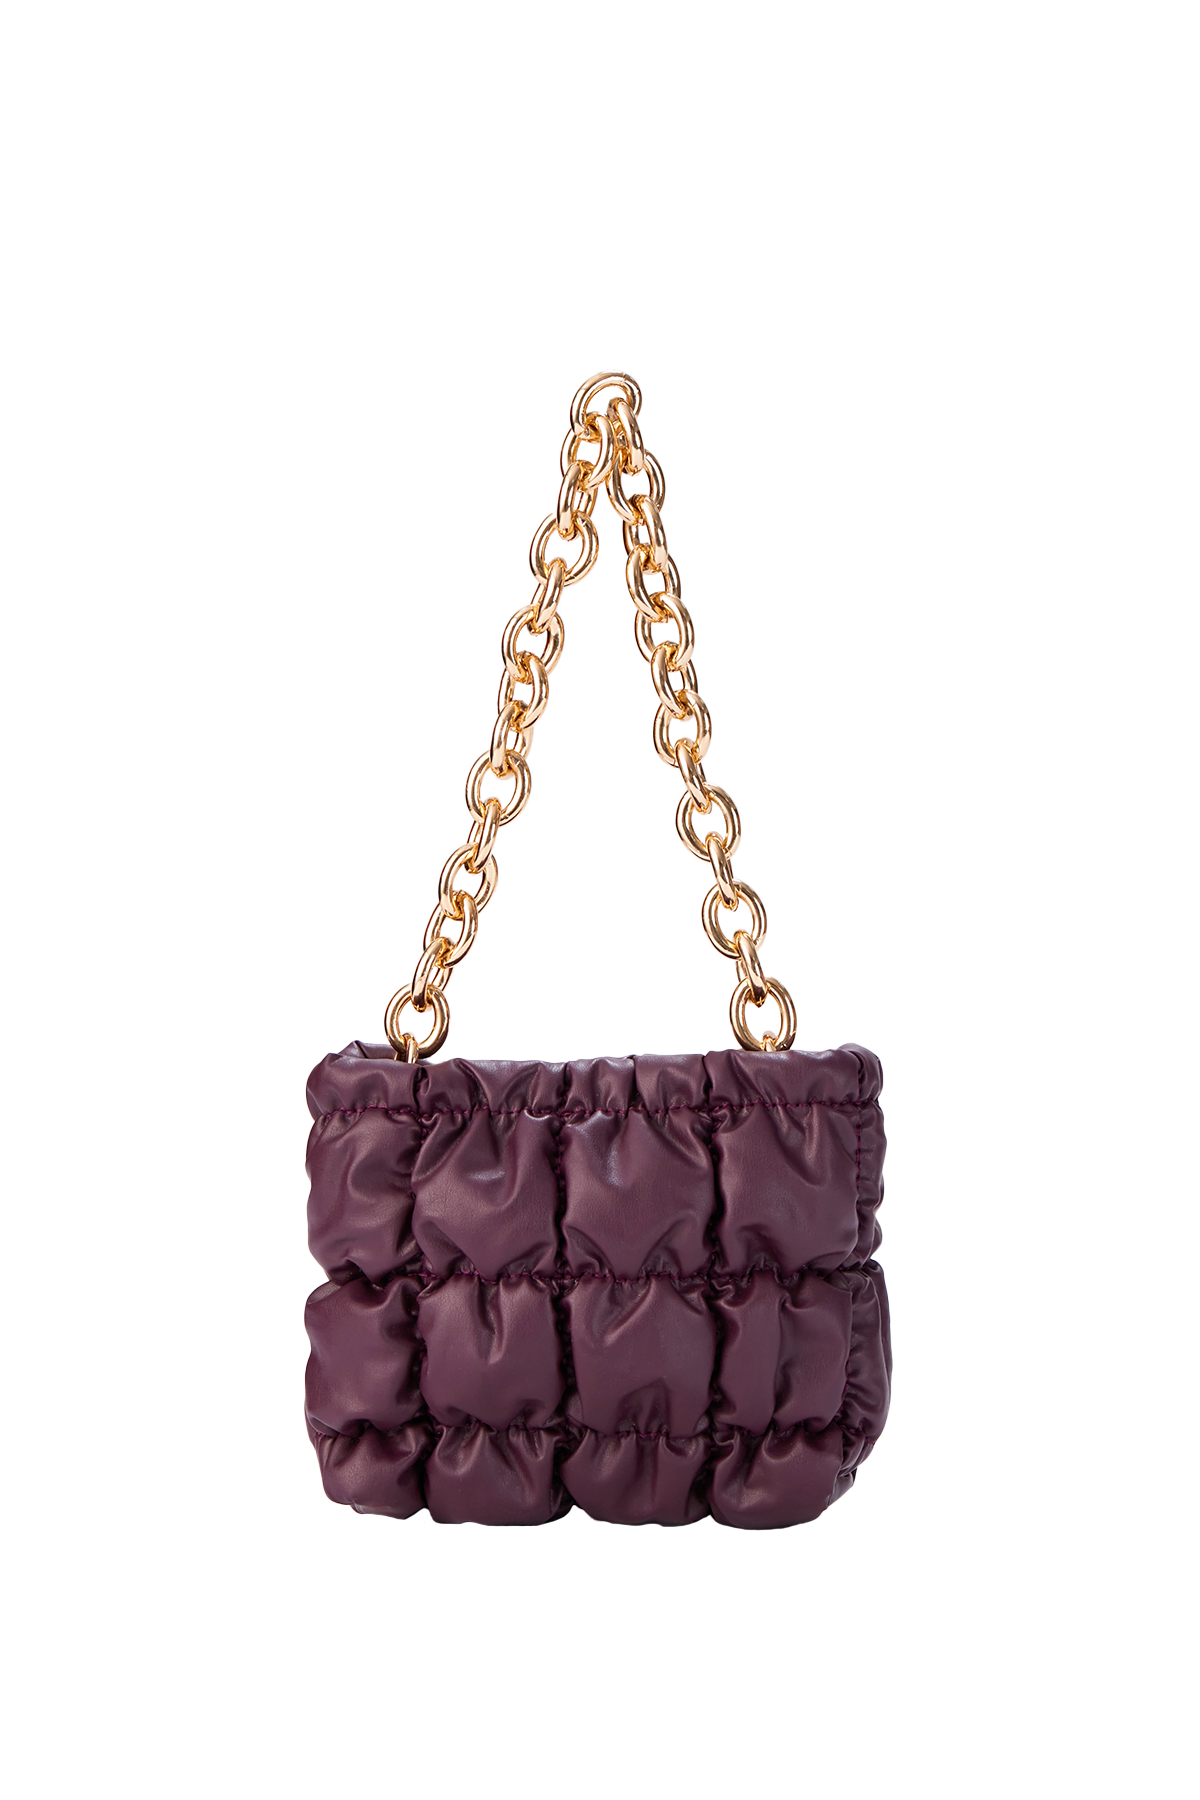 Quilted Vegan Leather Hand Bag - Plum